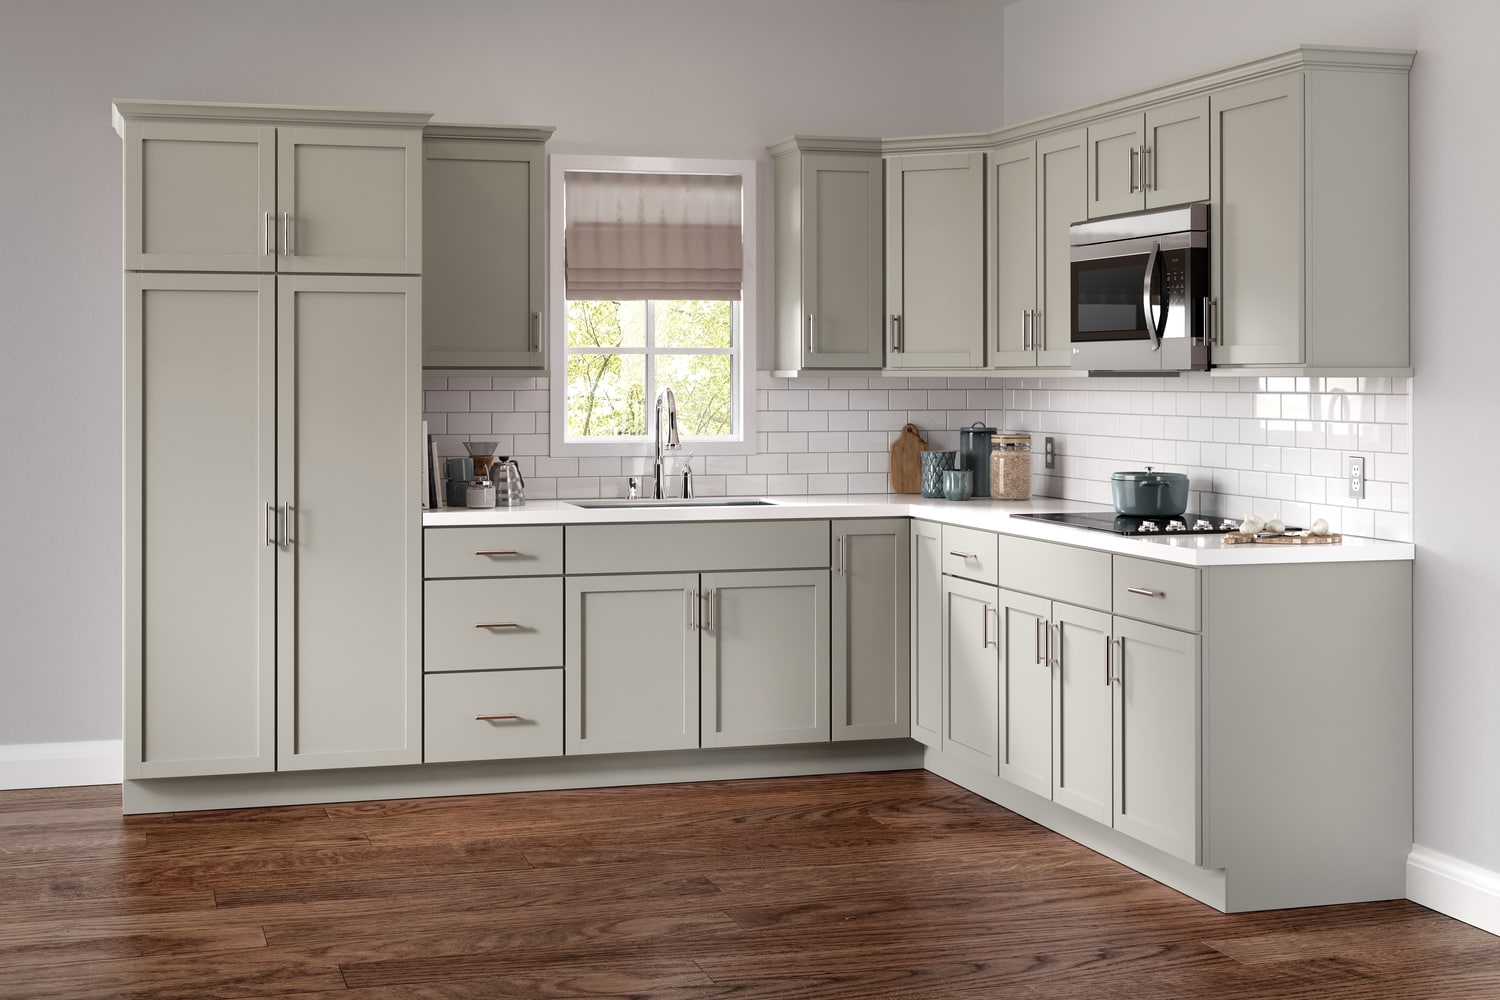 Project Source 36 In W X 30 H 12 D Gray Door Wall Fully Assembled Cabinet Recessed Panel Shaker Style The Kitchen Cabinets Department At Lowes Com